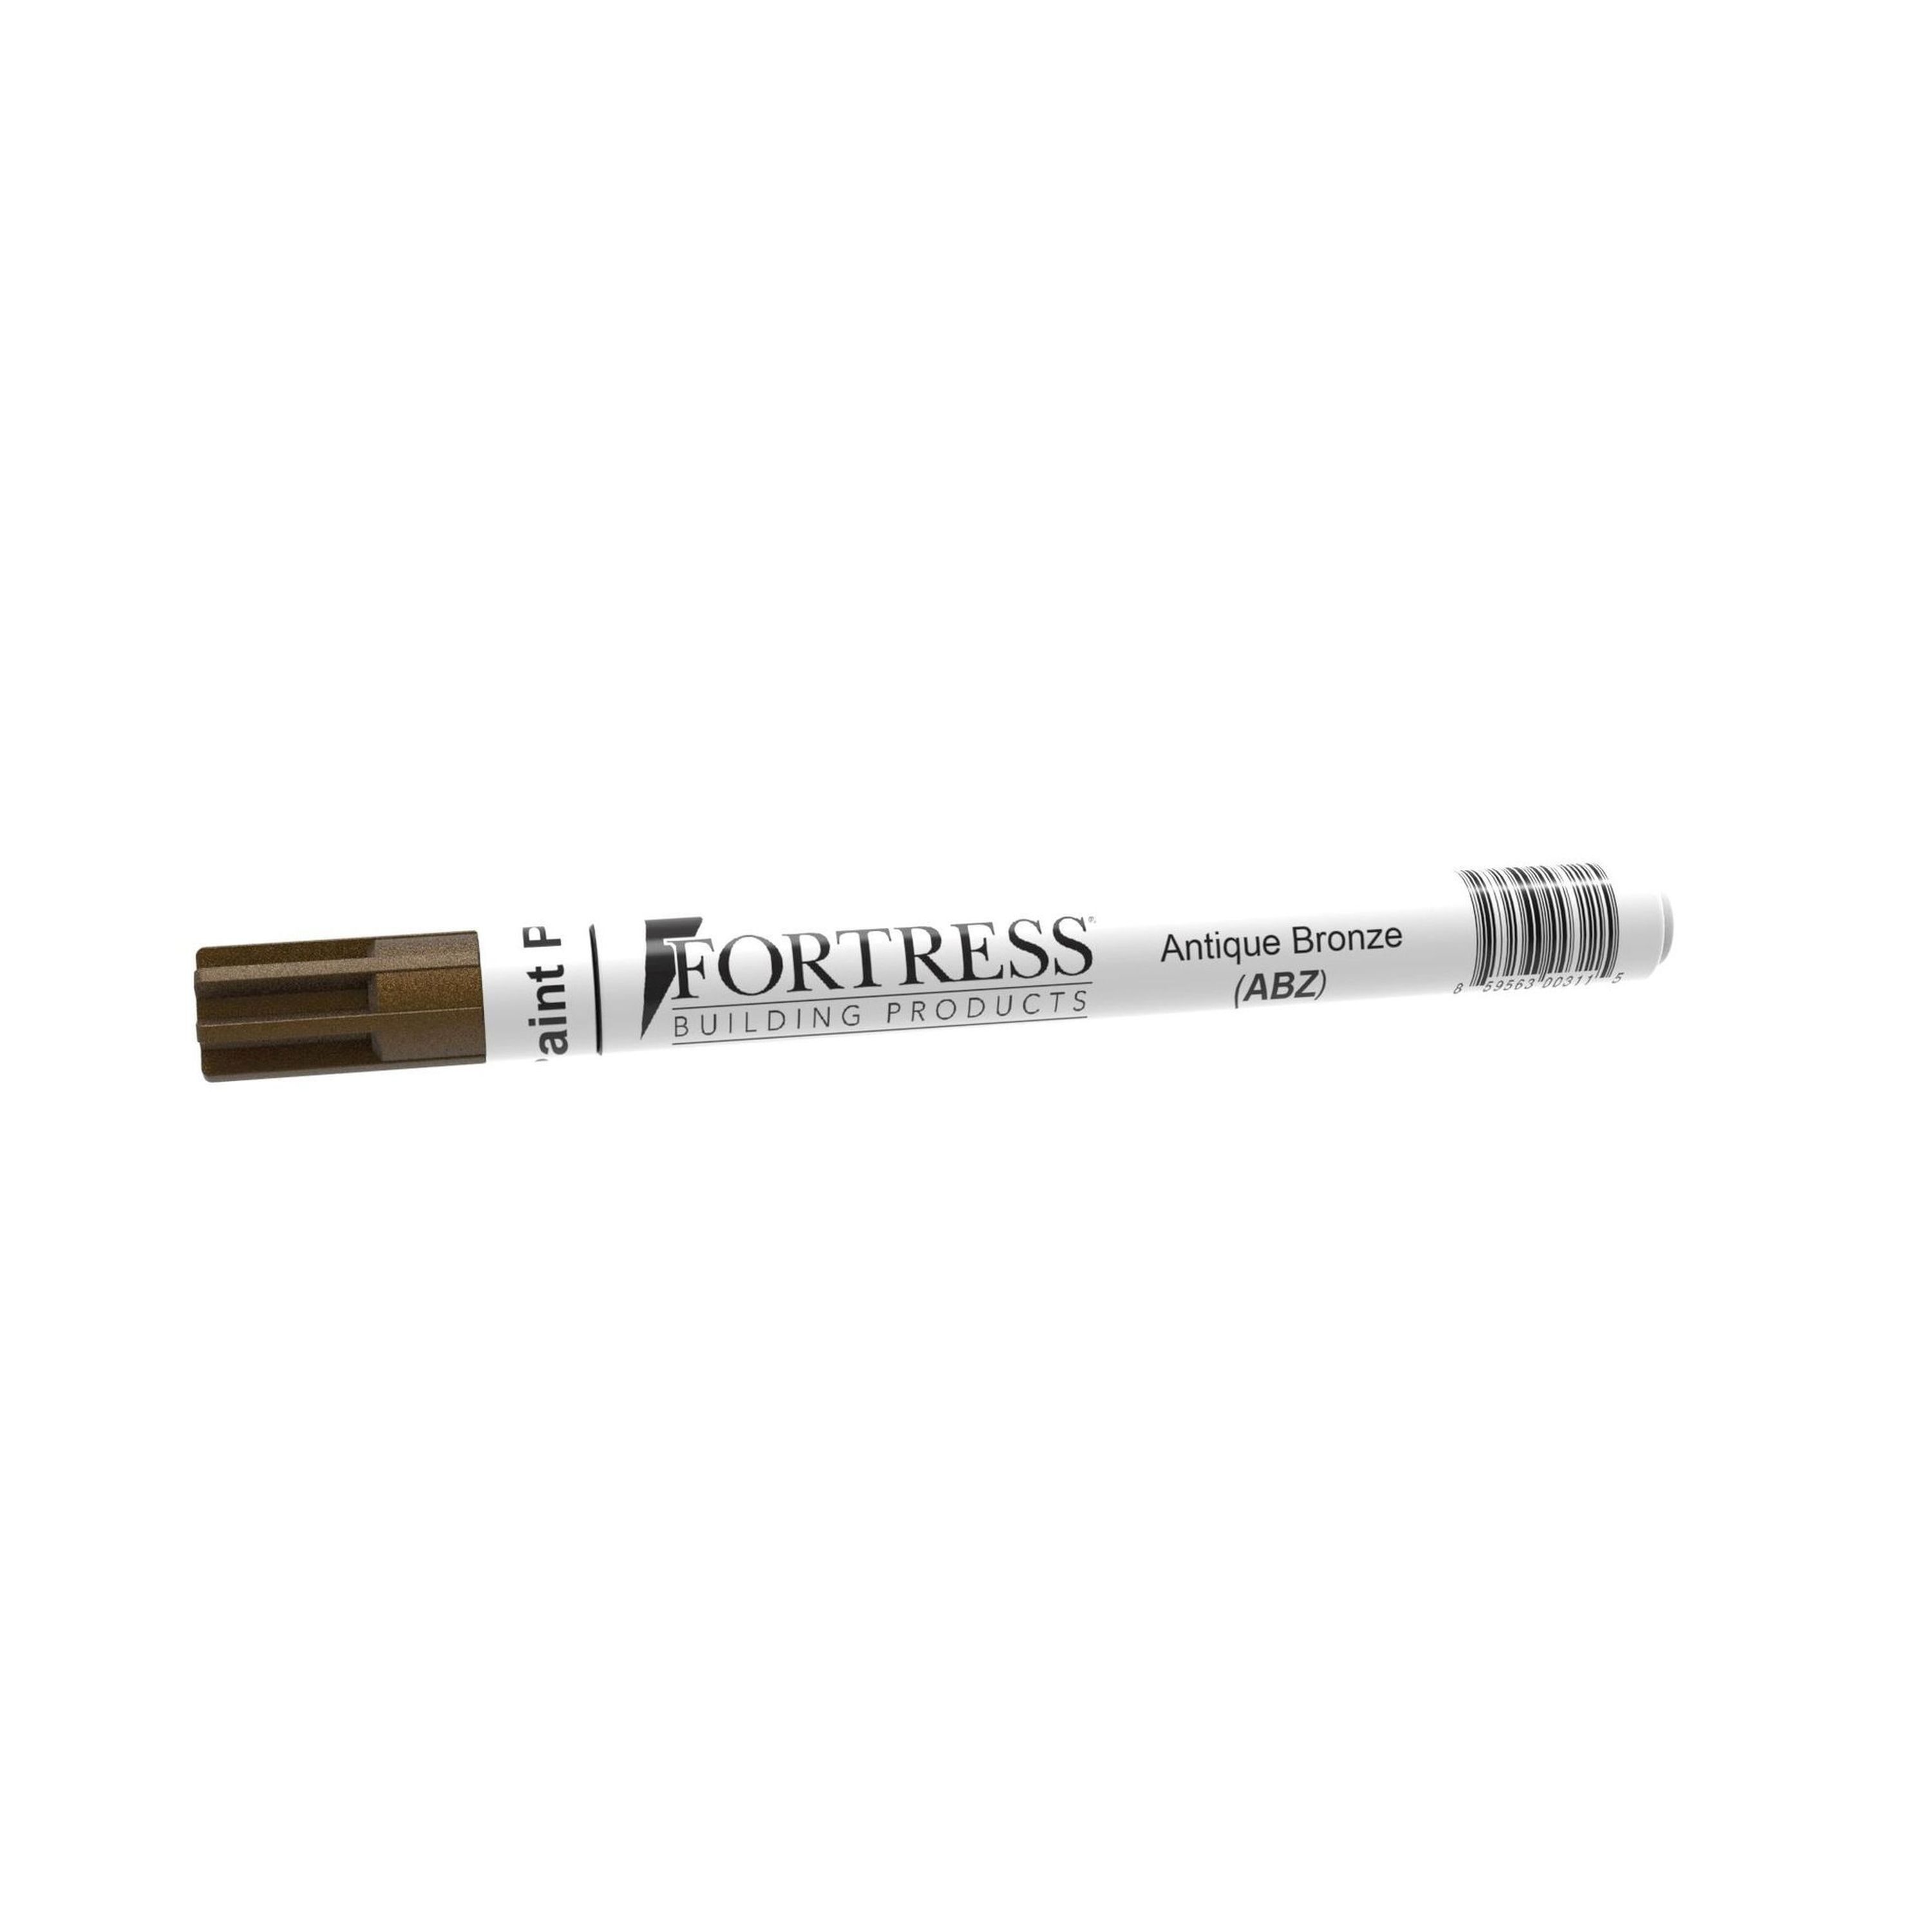 Fortress Touch-Up Paint Pen - Gloss Black